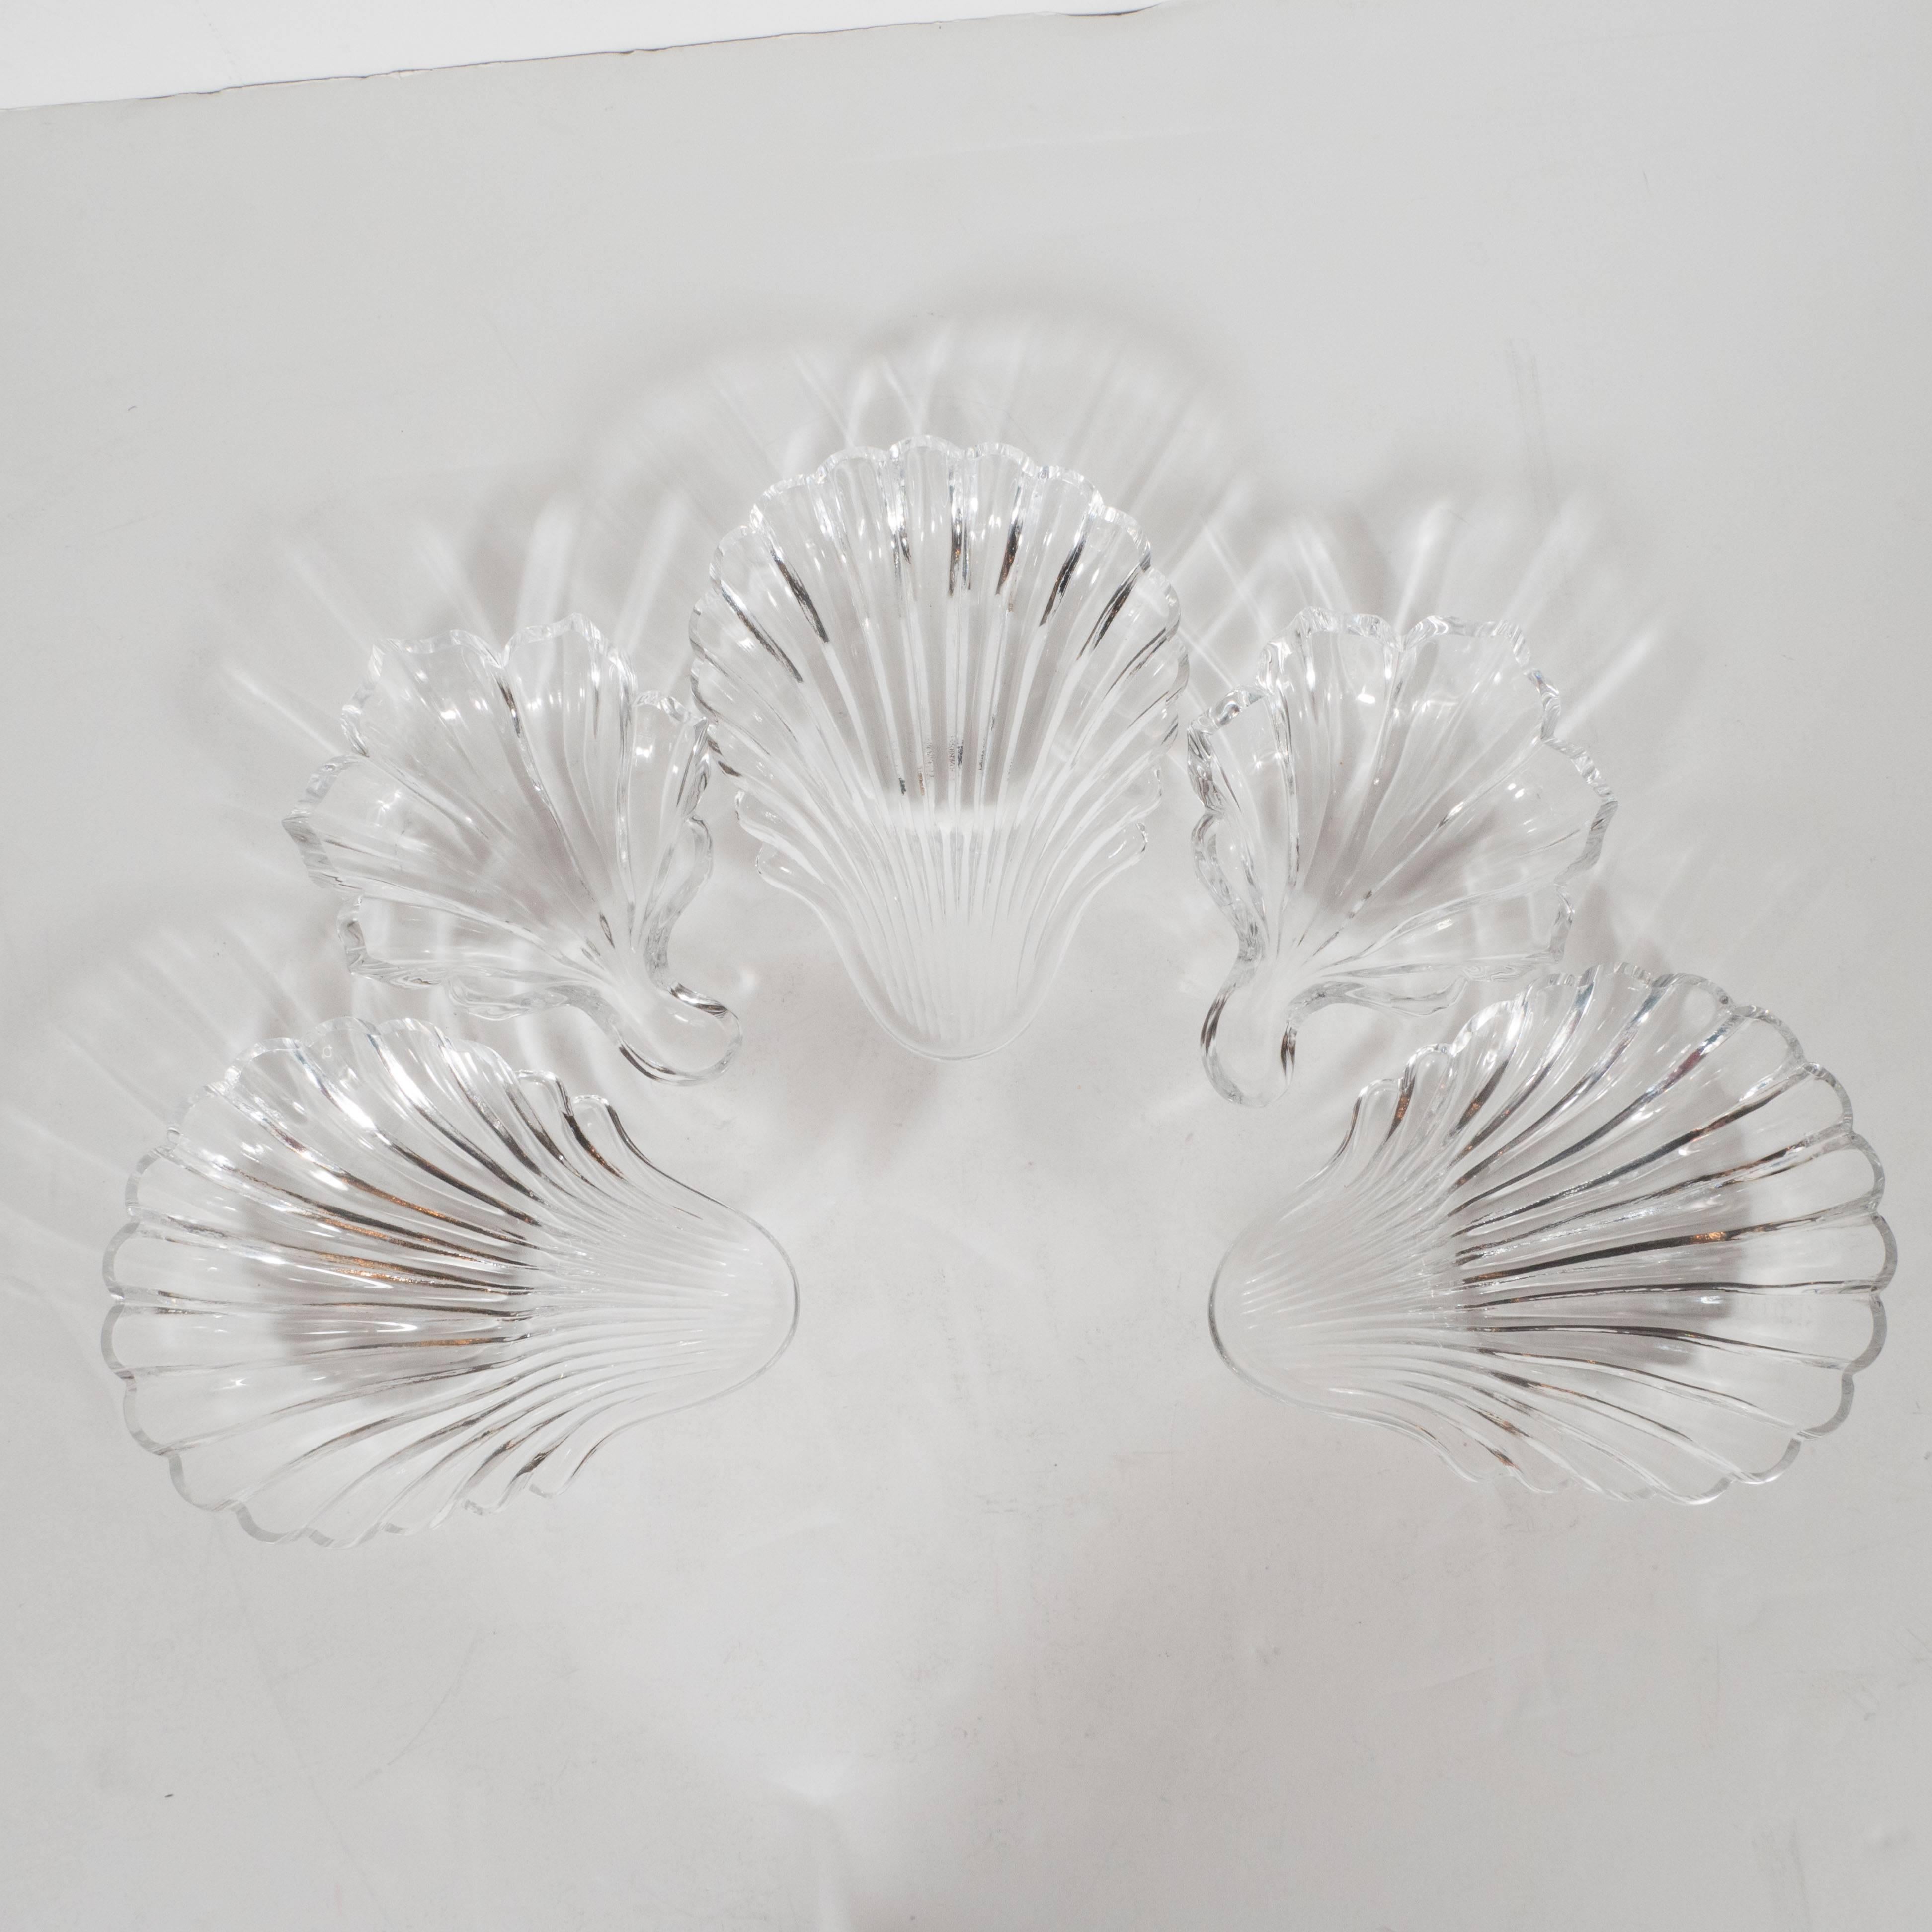 This stunning set of nut and condiment bowls were created by Baccarat, one of the world's most illustrious crystal companies- in France, circa 1960. The set is comprised of five bowls in total- three larger ones and two smaller ones. The larger